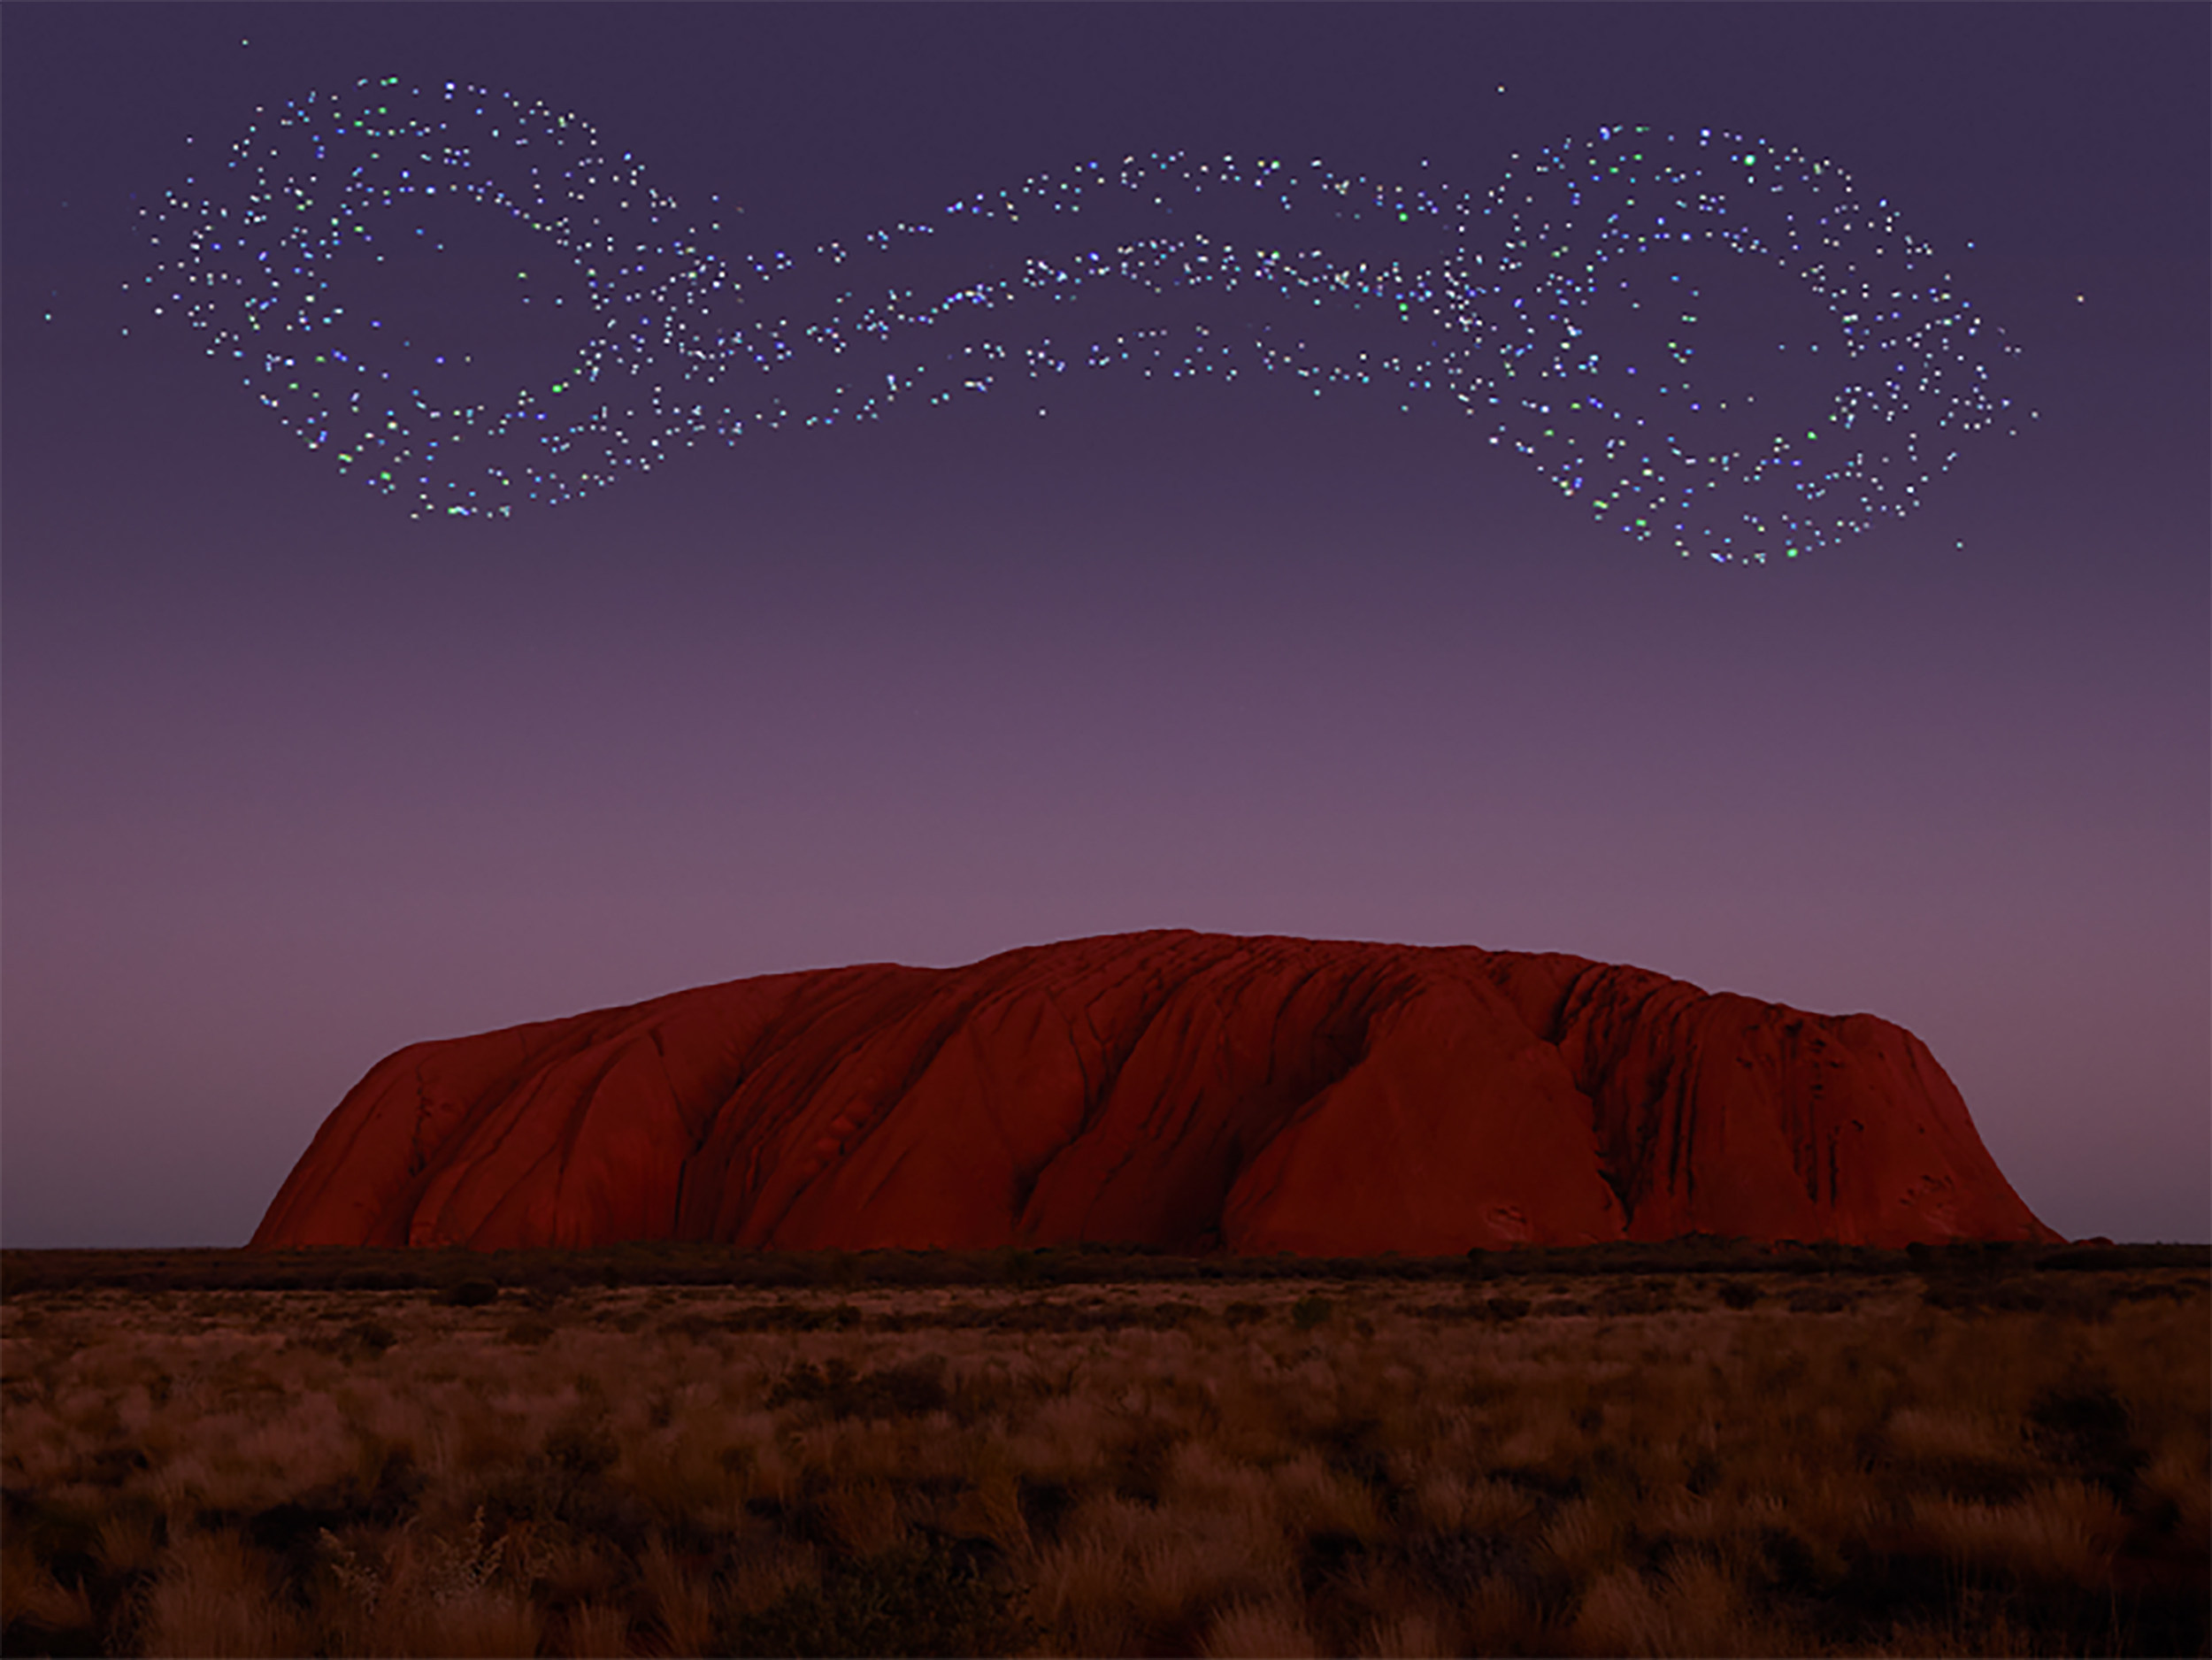 Drones fly above Uluru during the Wintjiri Wiru drone show, in Australia. The country has started offering several tourism experiences tied to Aboriginal history. Photo: Voyages Indigenous Tourism Australia